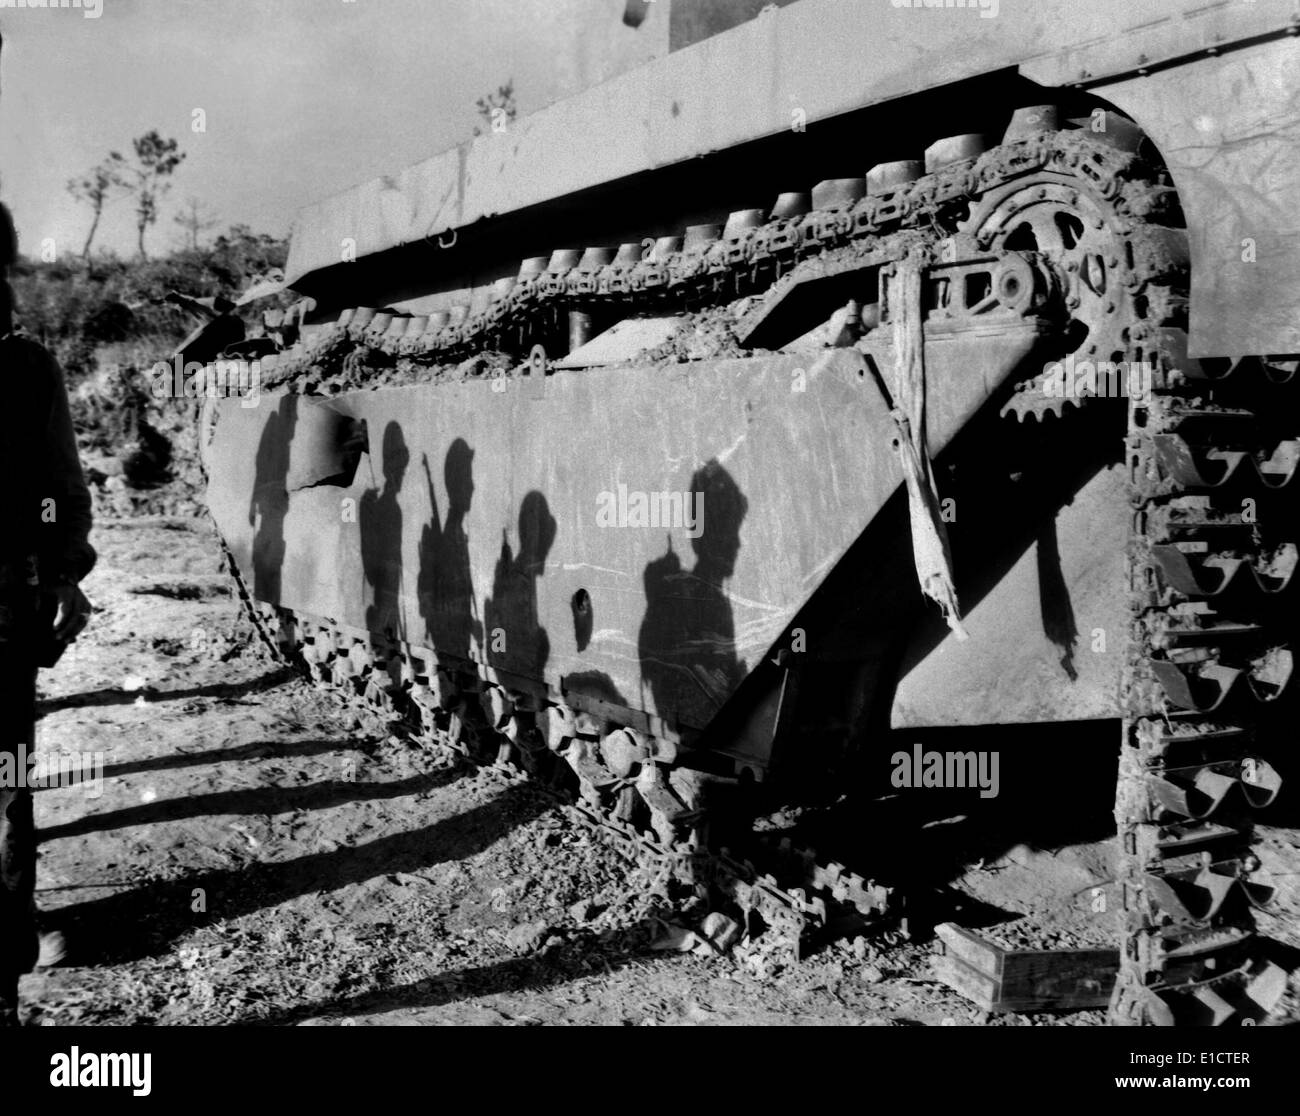 Shadows of 6th Division Marines on a battle-wrecked tank on Okinawa. The soldiers are advancing to mop up operations in the Stock Photo